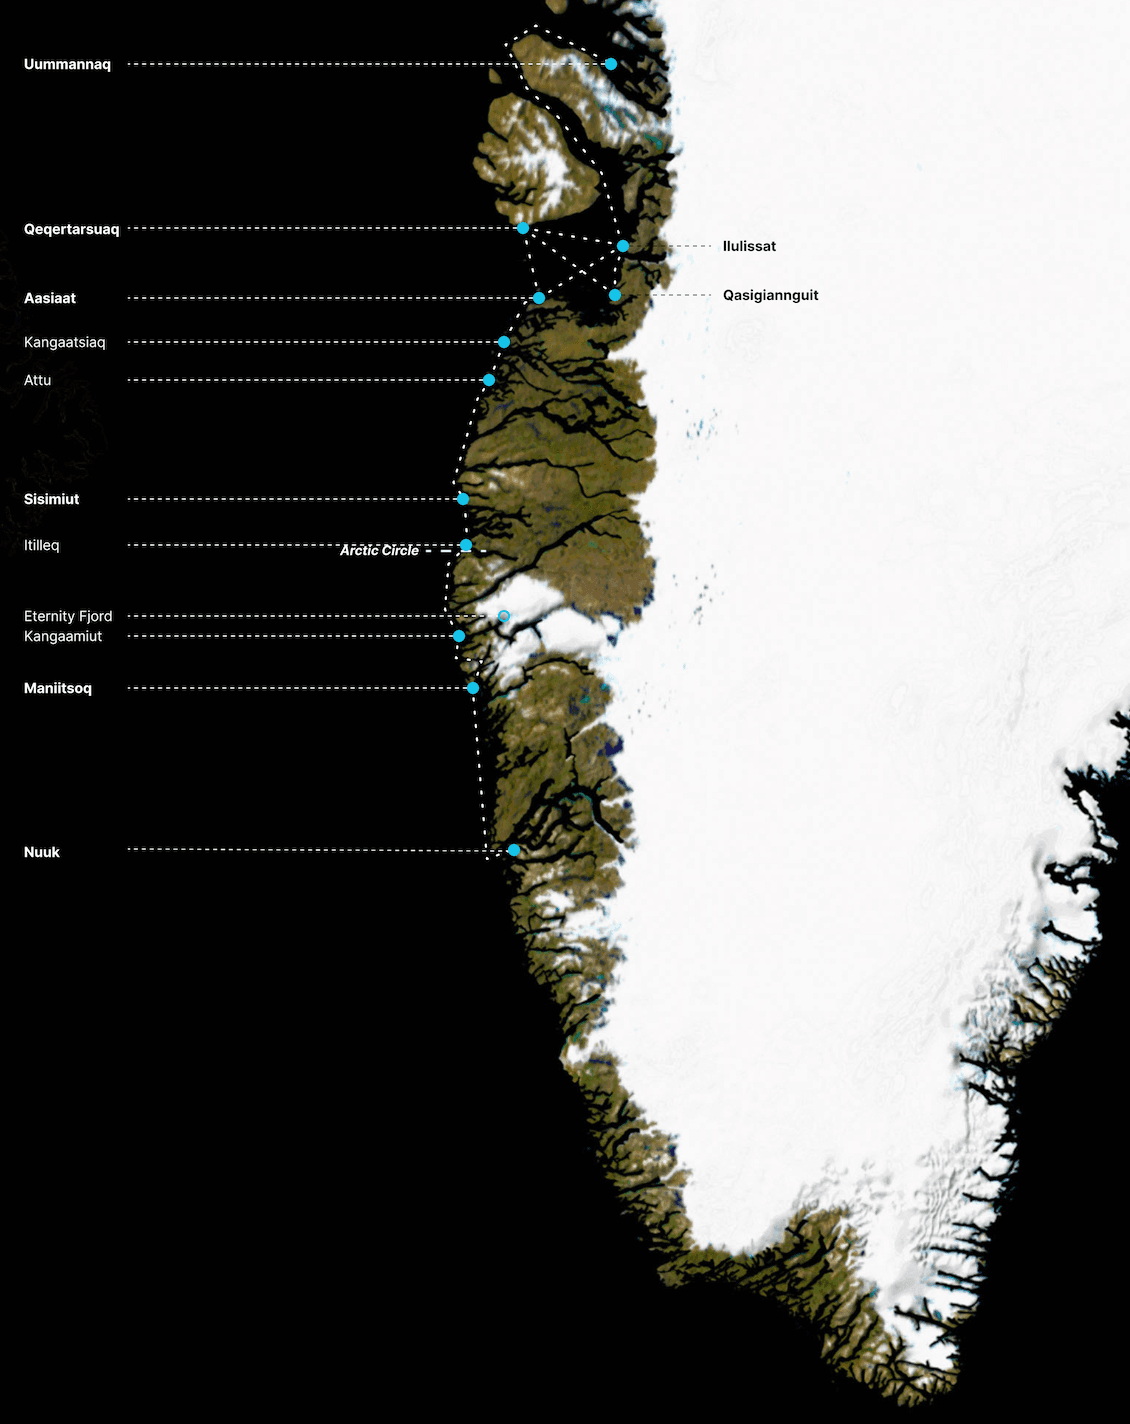 The North Greenland Voyage map